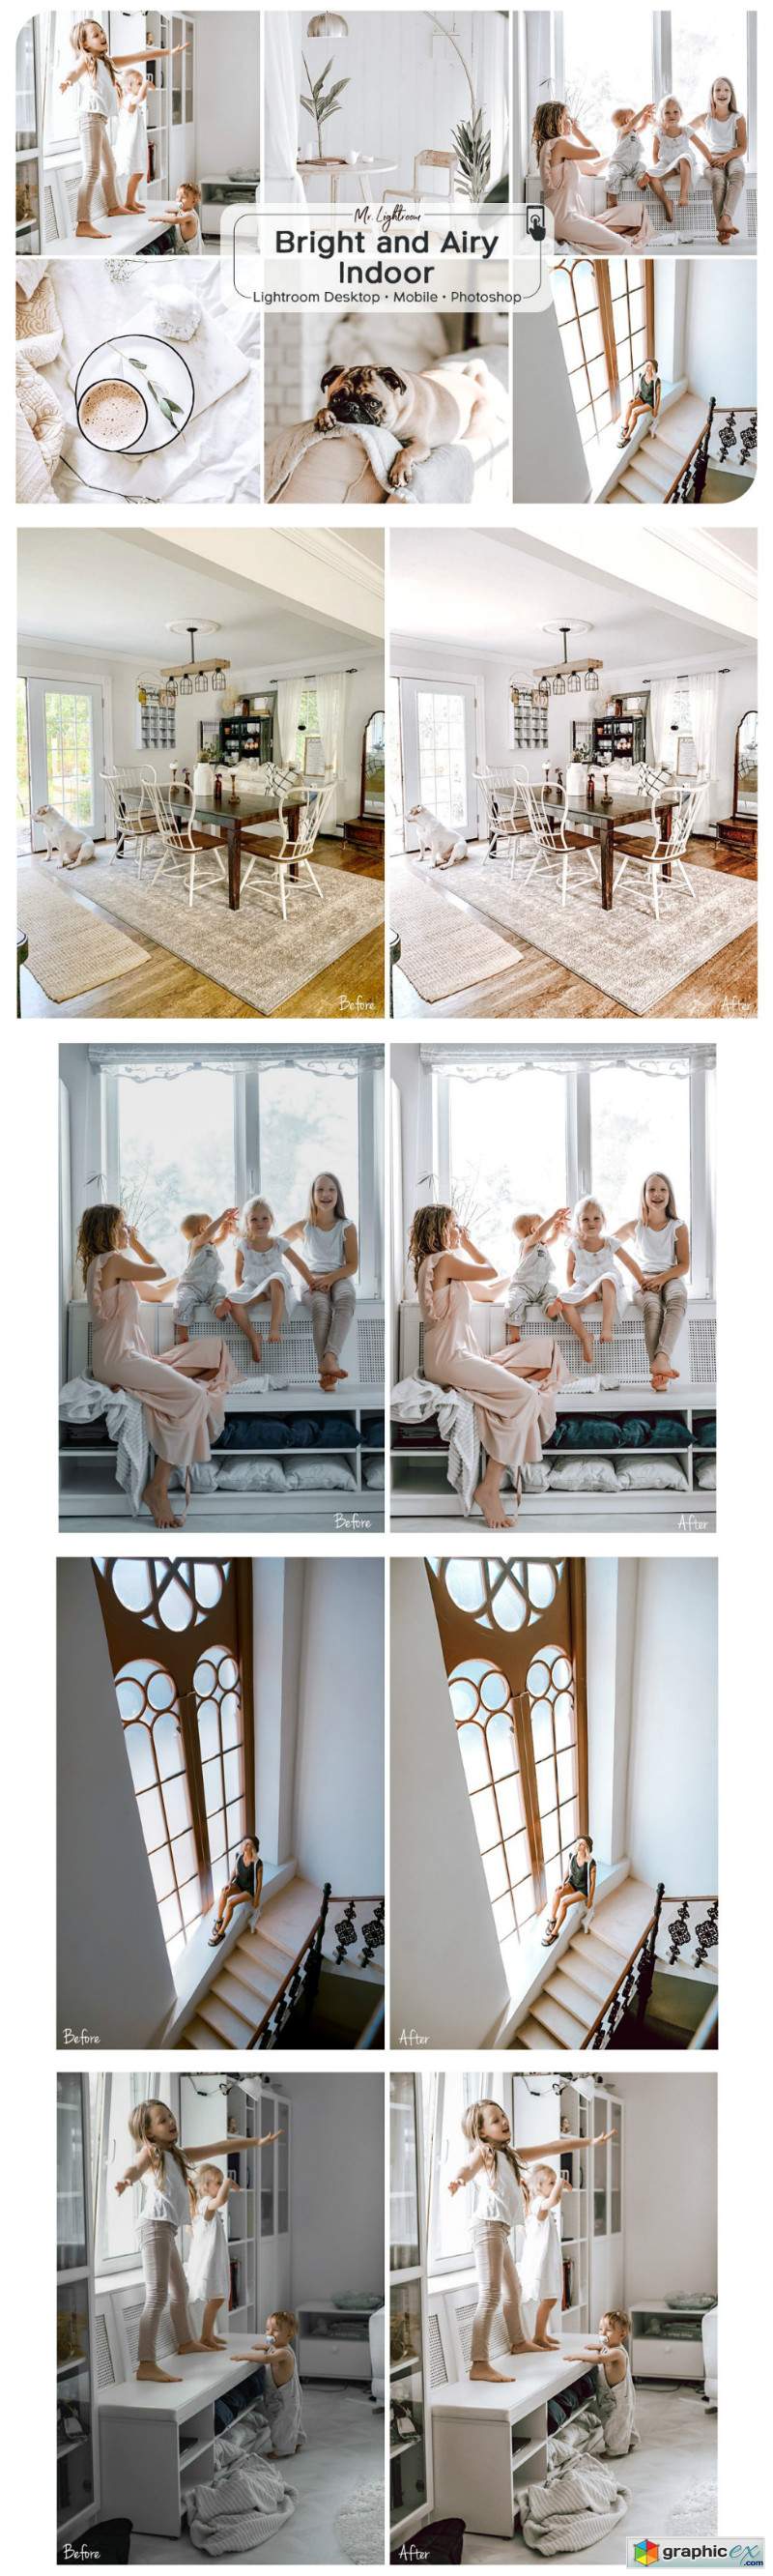 Bright and Airy Indoor Presets